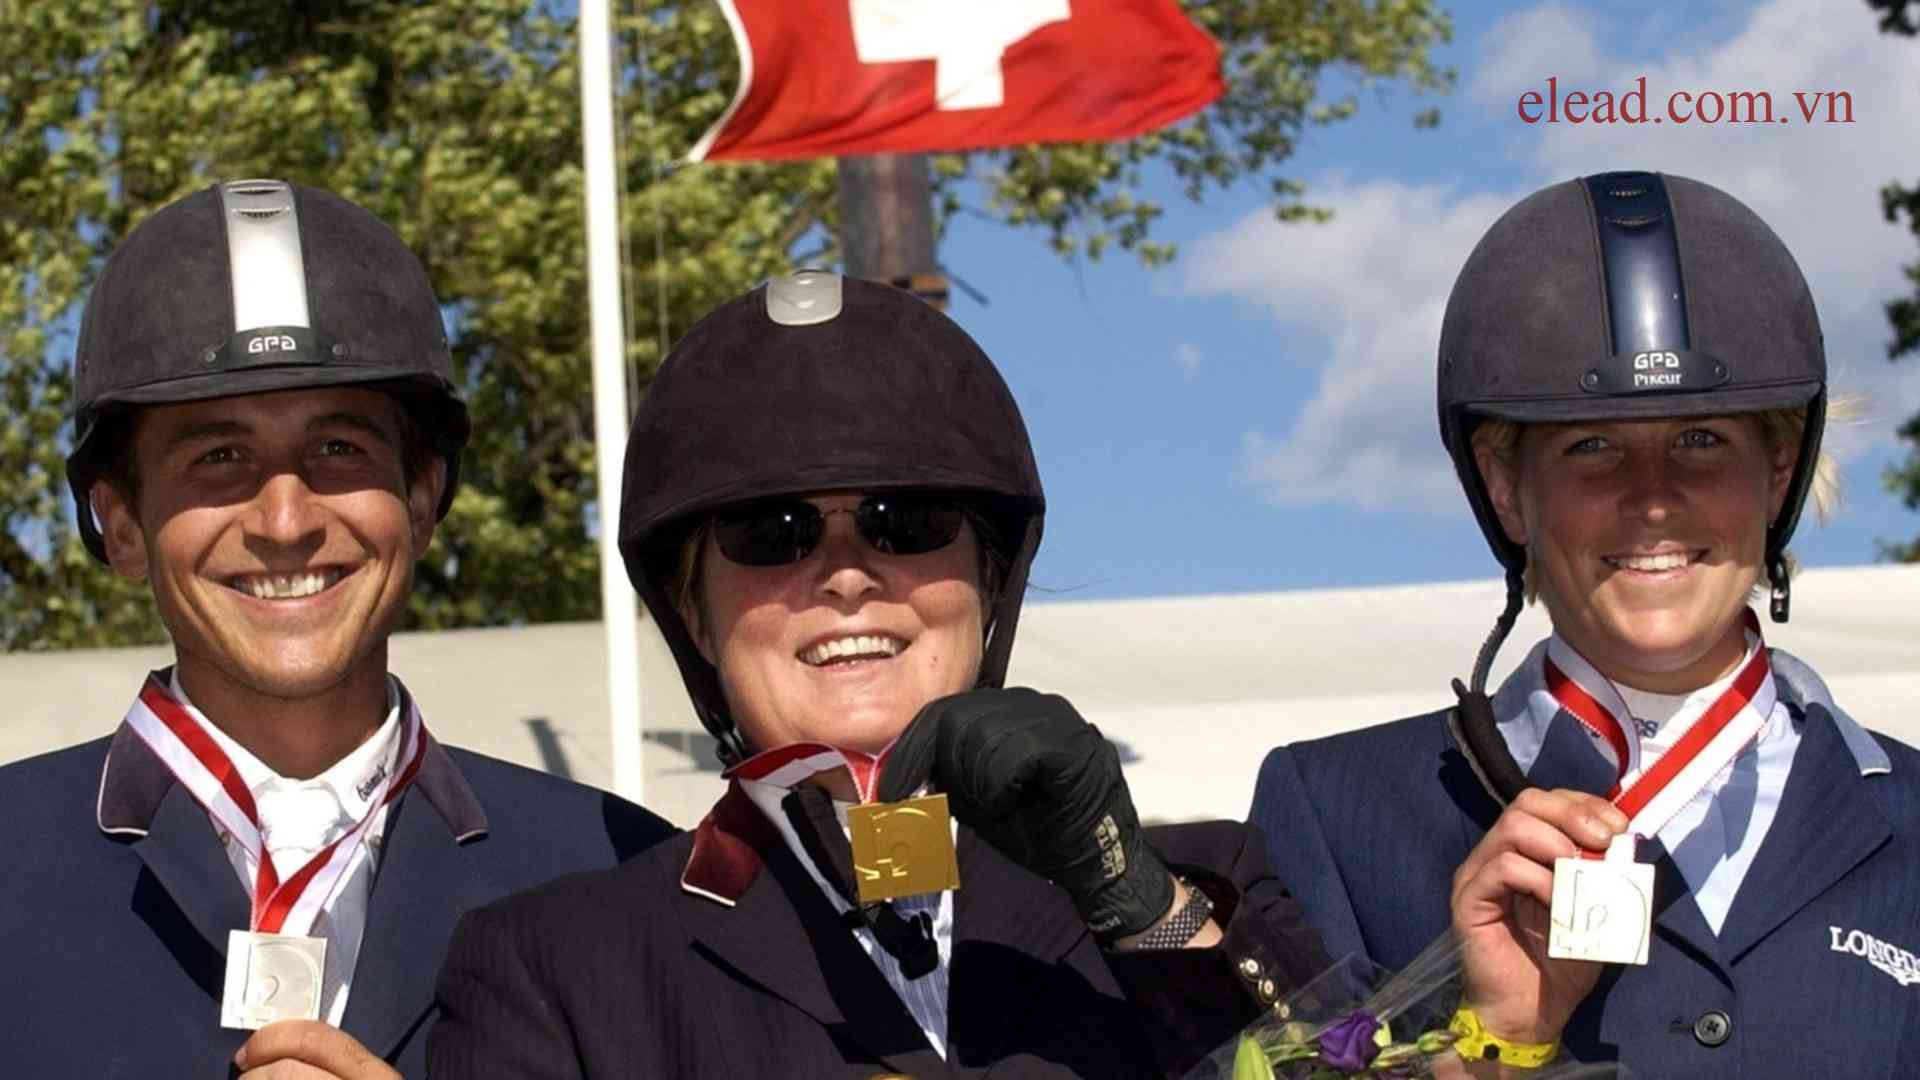 Lesley McNaught Death Announcement: Former World-Class Racer and Swiss Equestrian Sport Figure Passes Away at 59